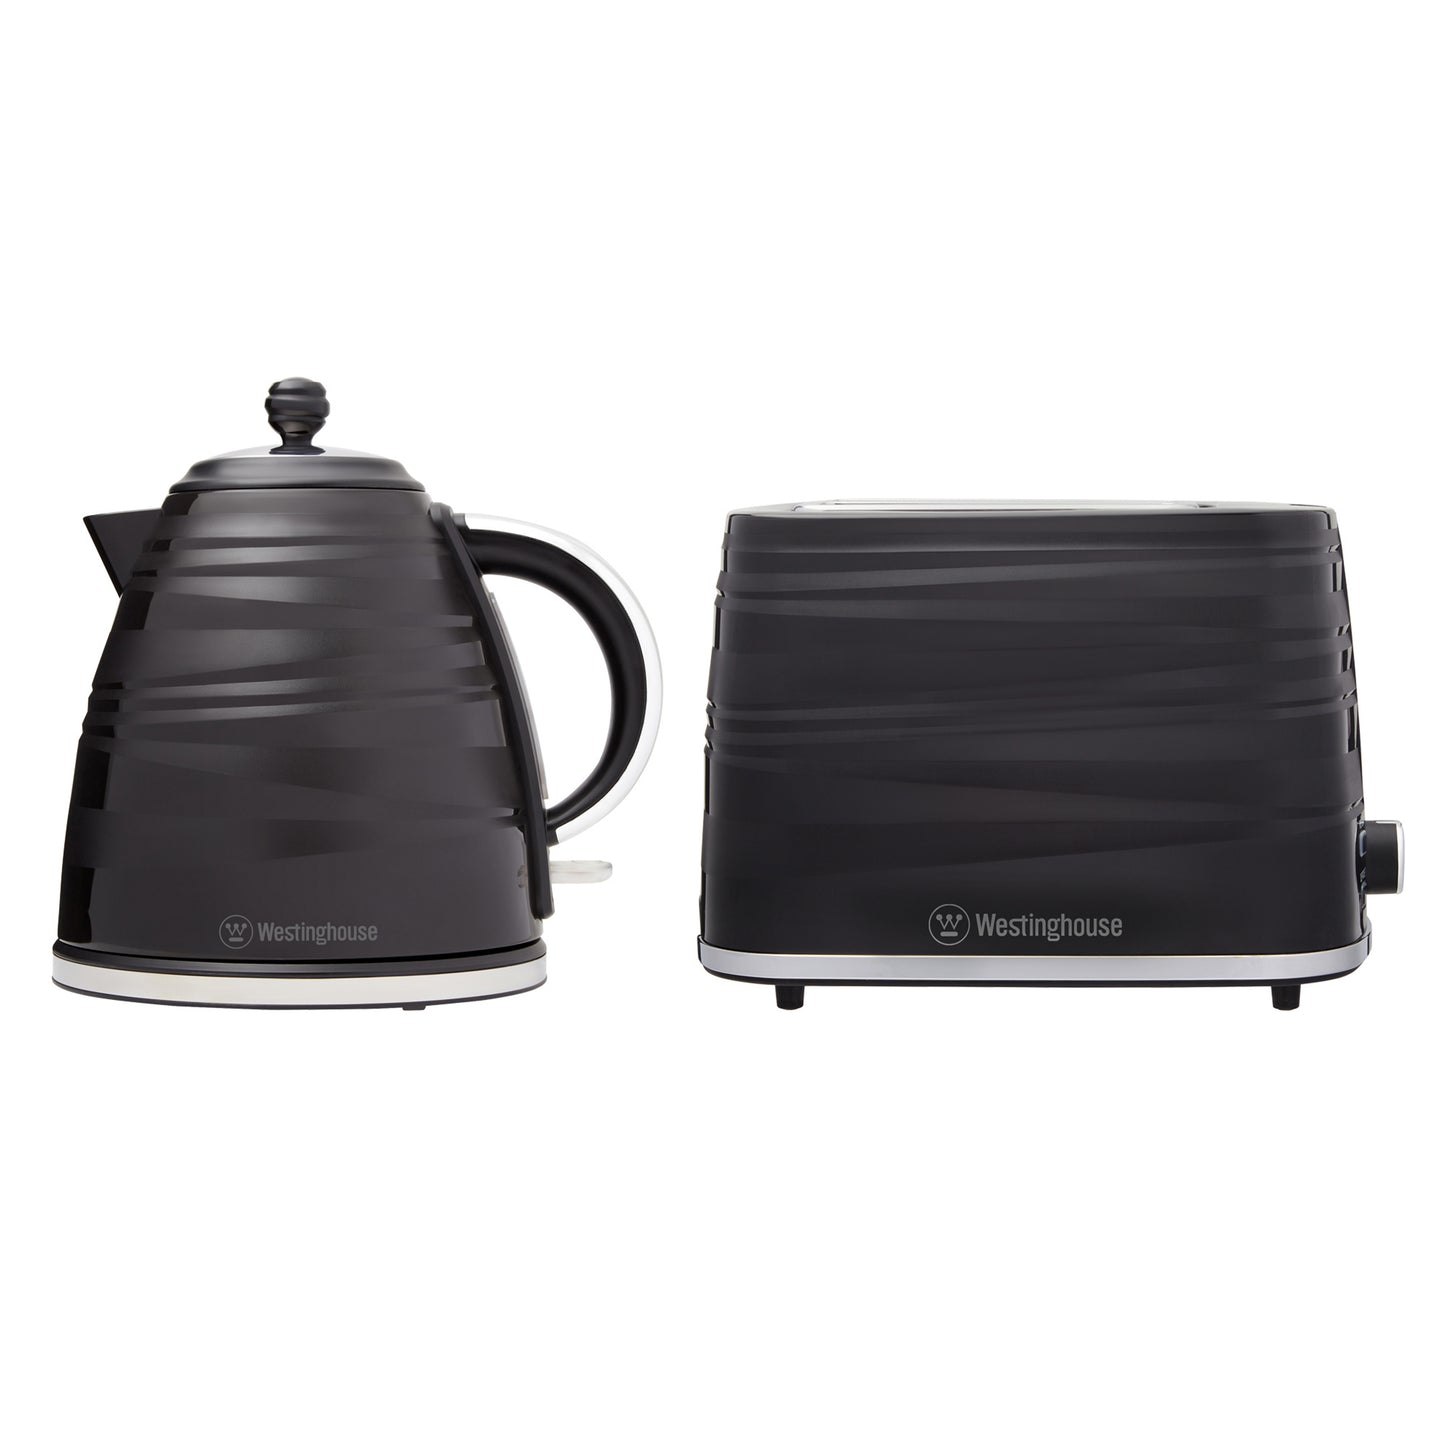 Westinghouse Kettle and Toaster Pack Black Striped 1.7L Kettle, 2 Slice Toaster